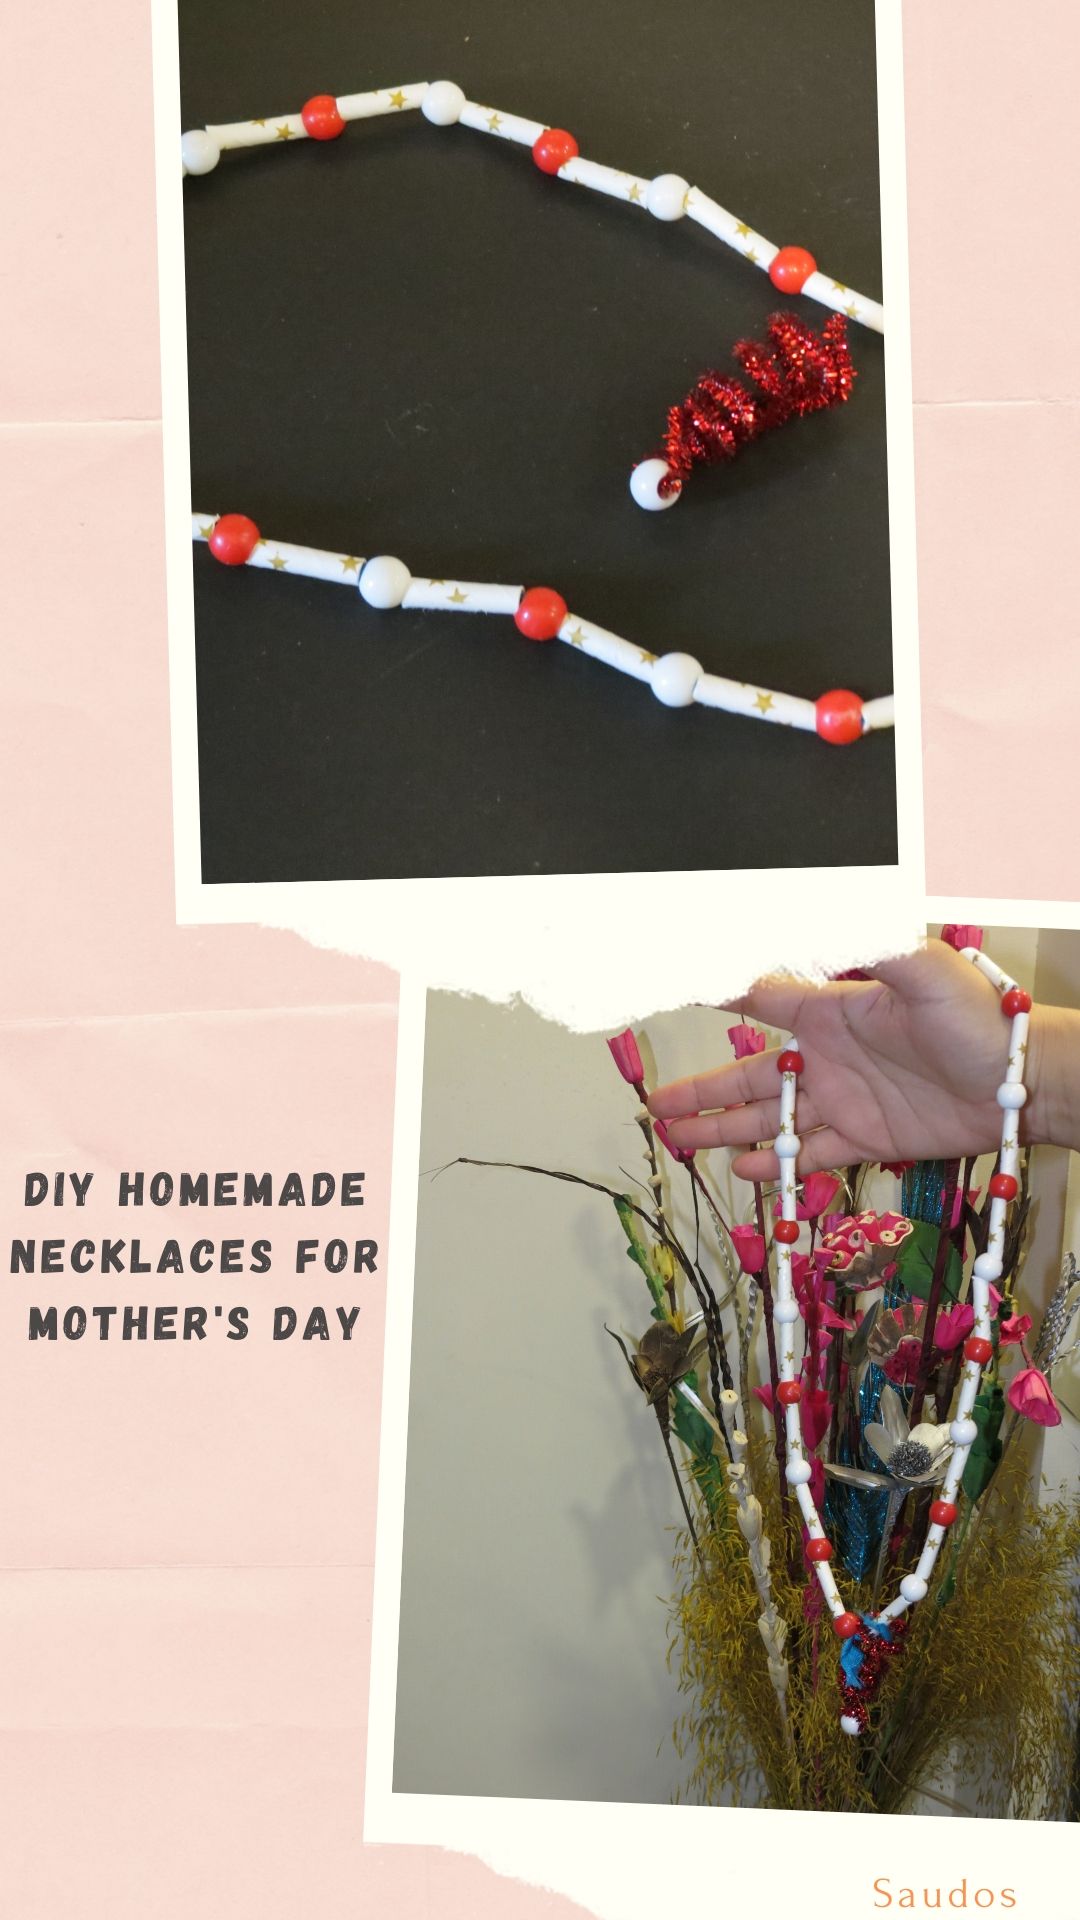 Homemade Necklaces for Mother's Day